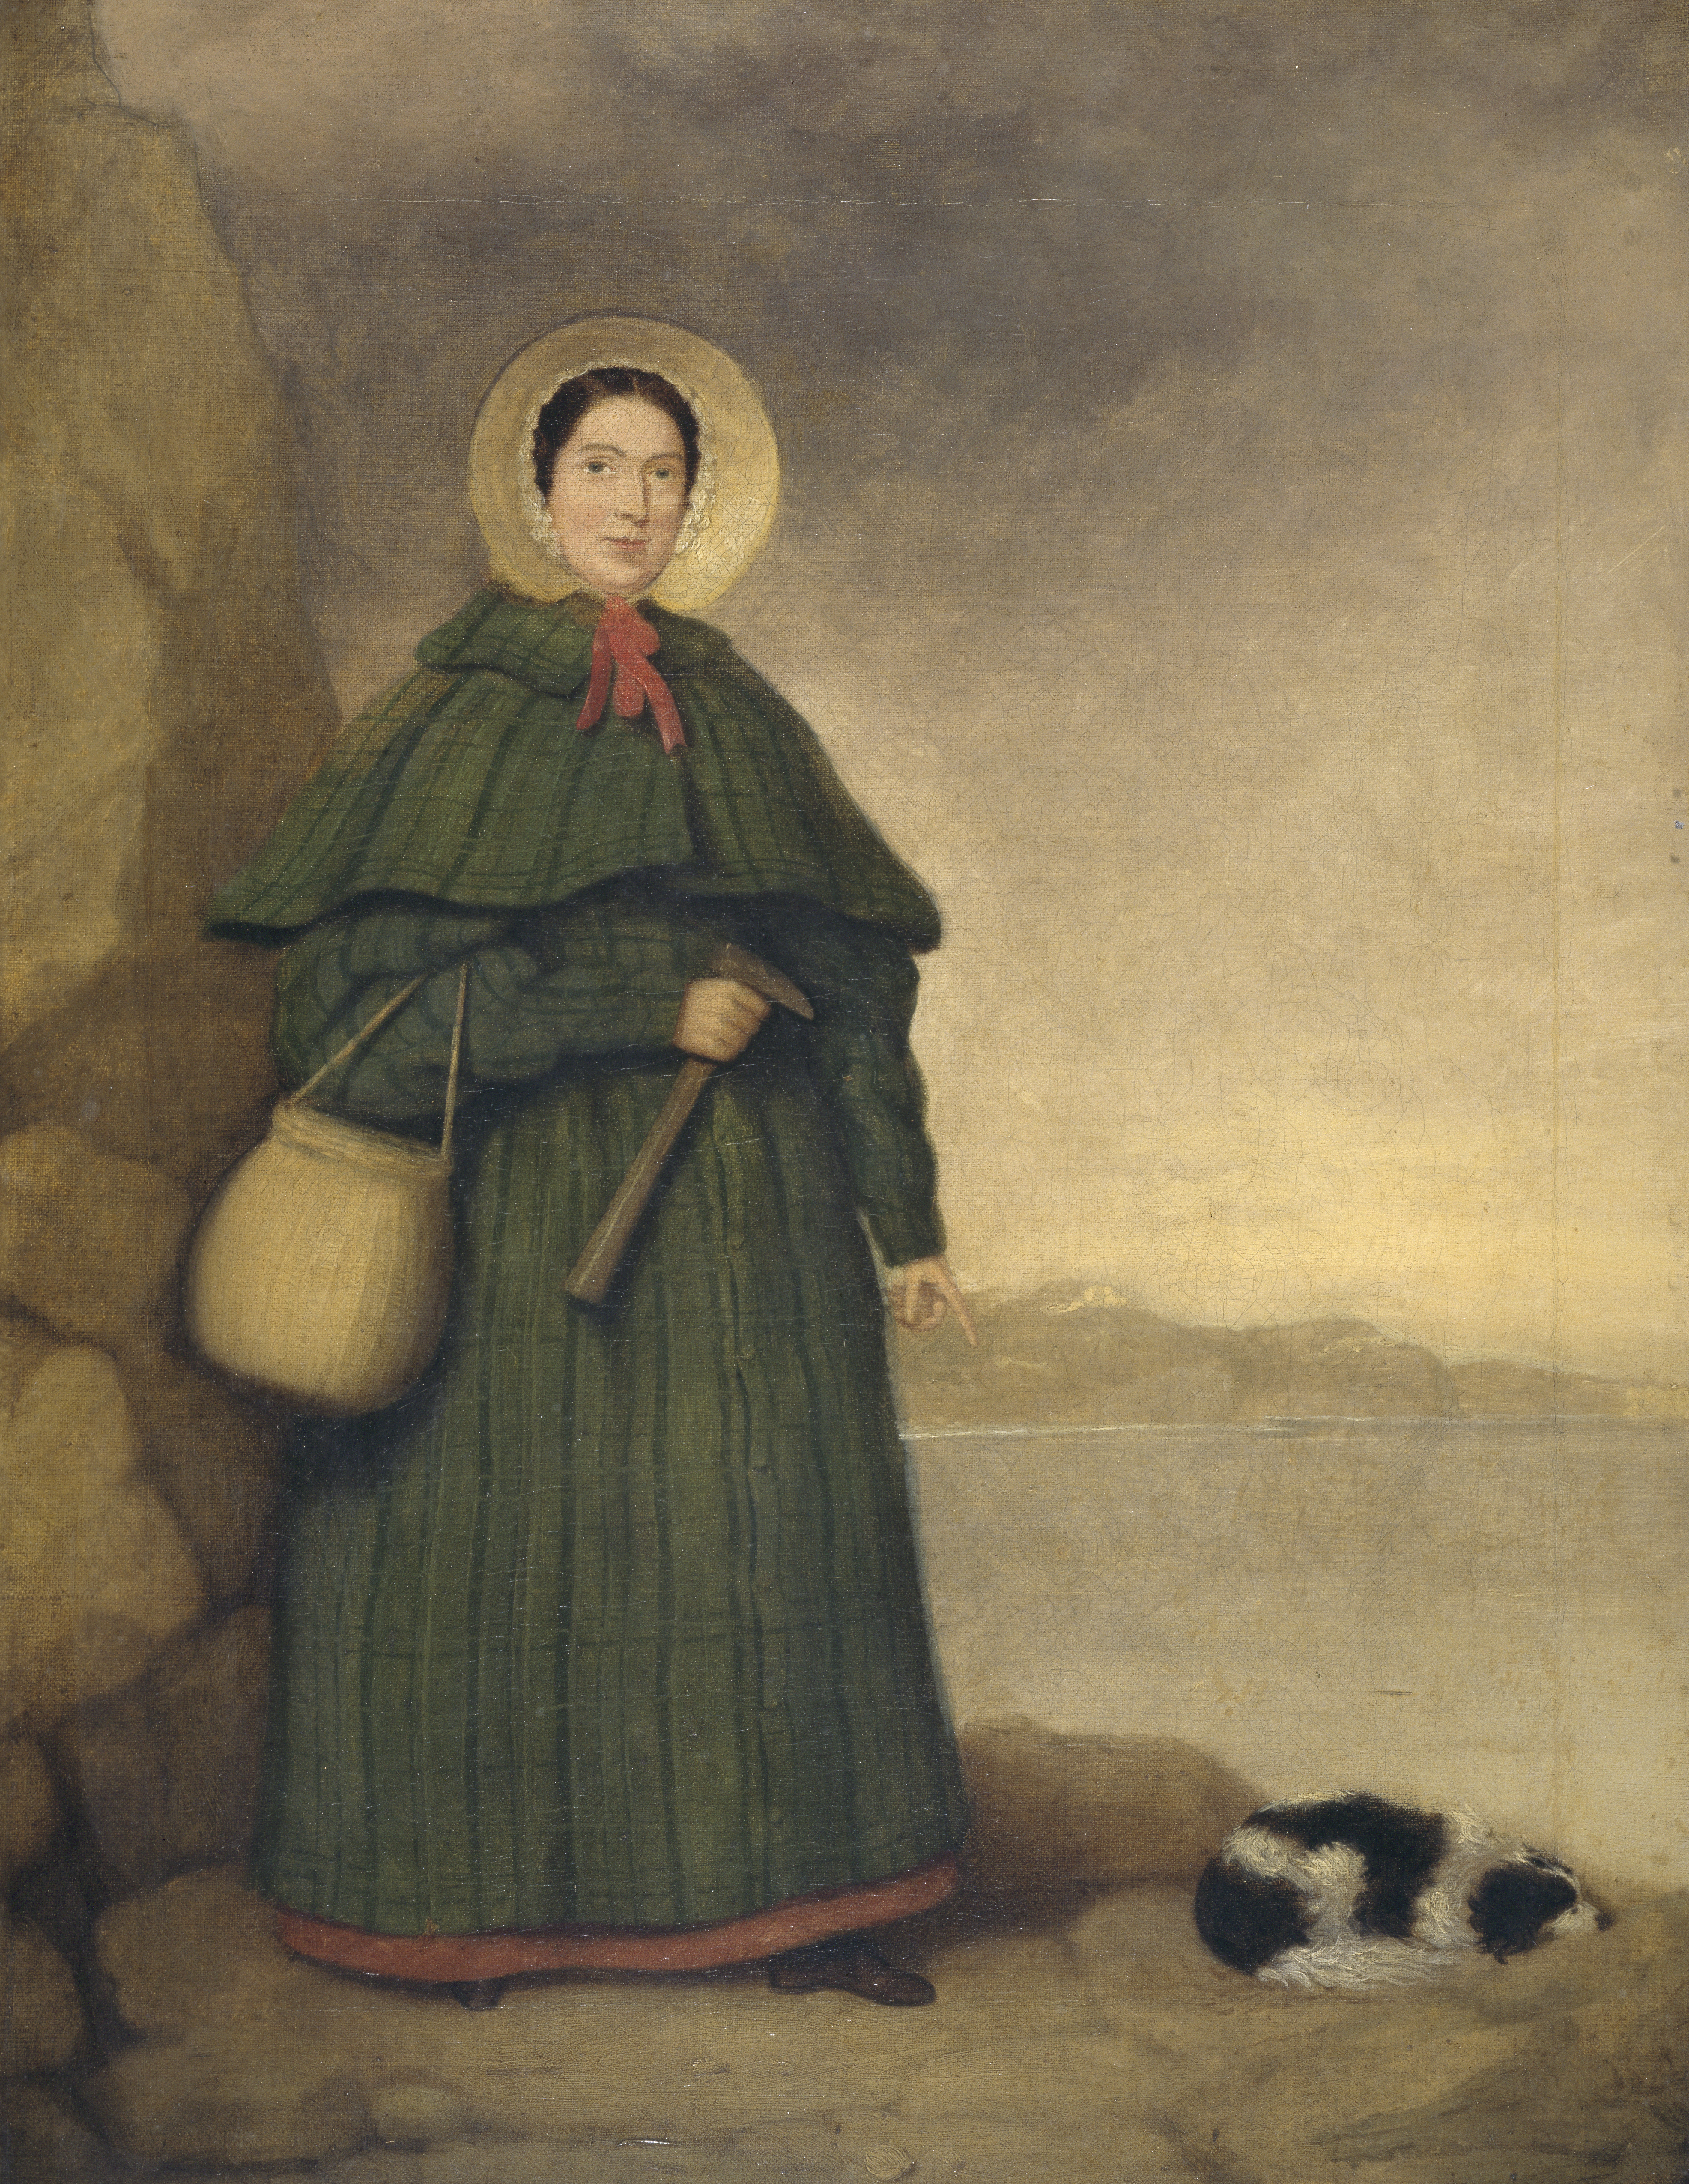 Mary Anning - Wikipedia